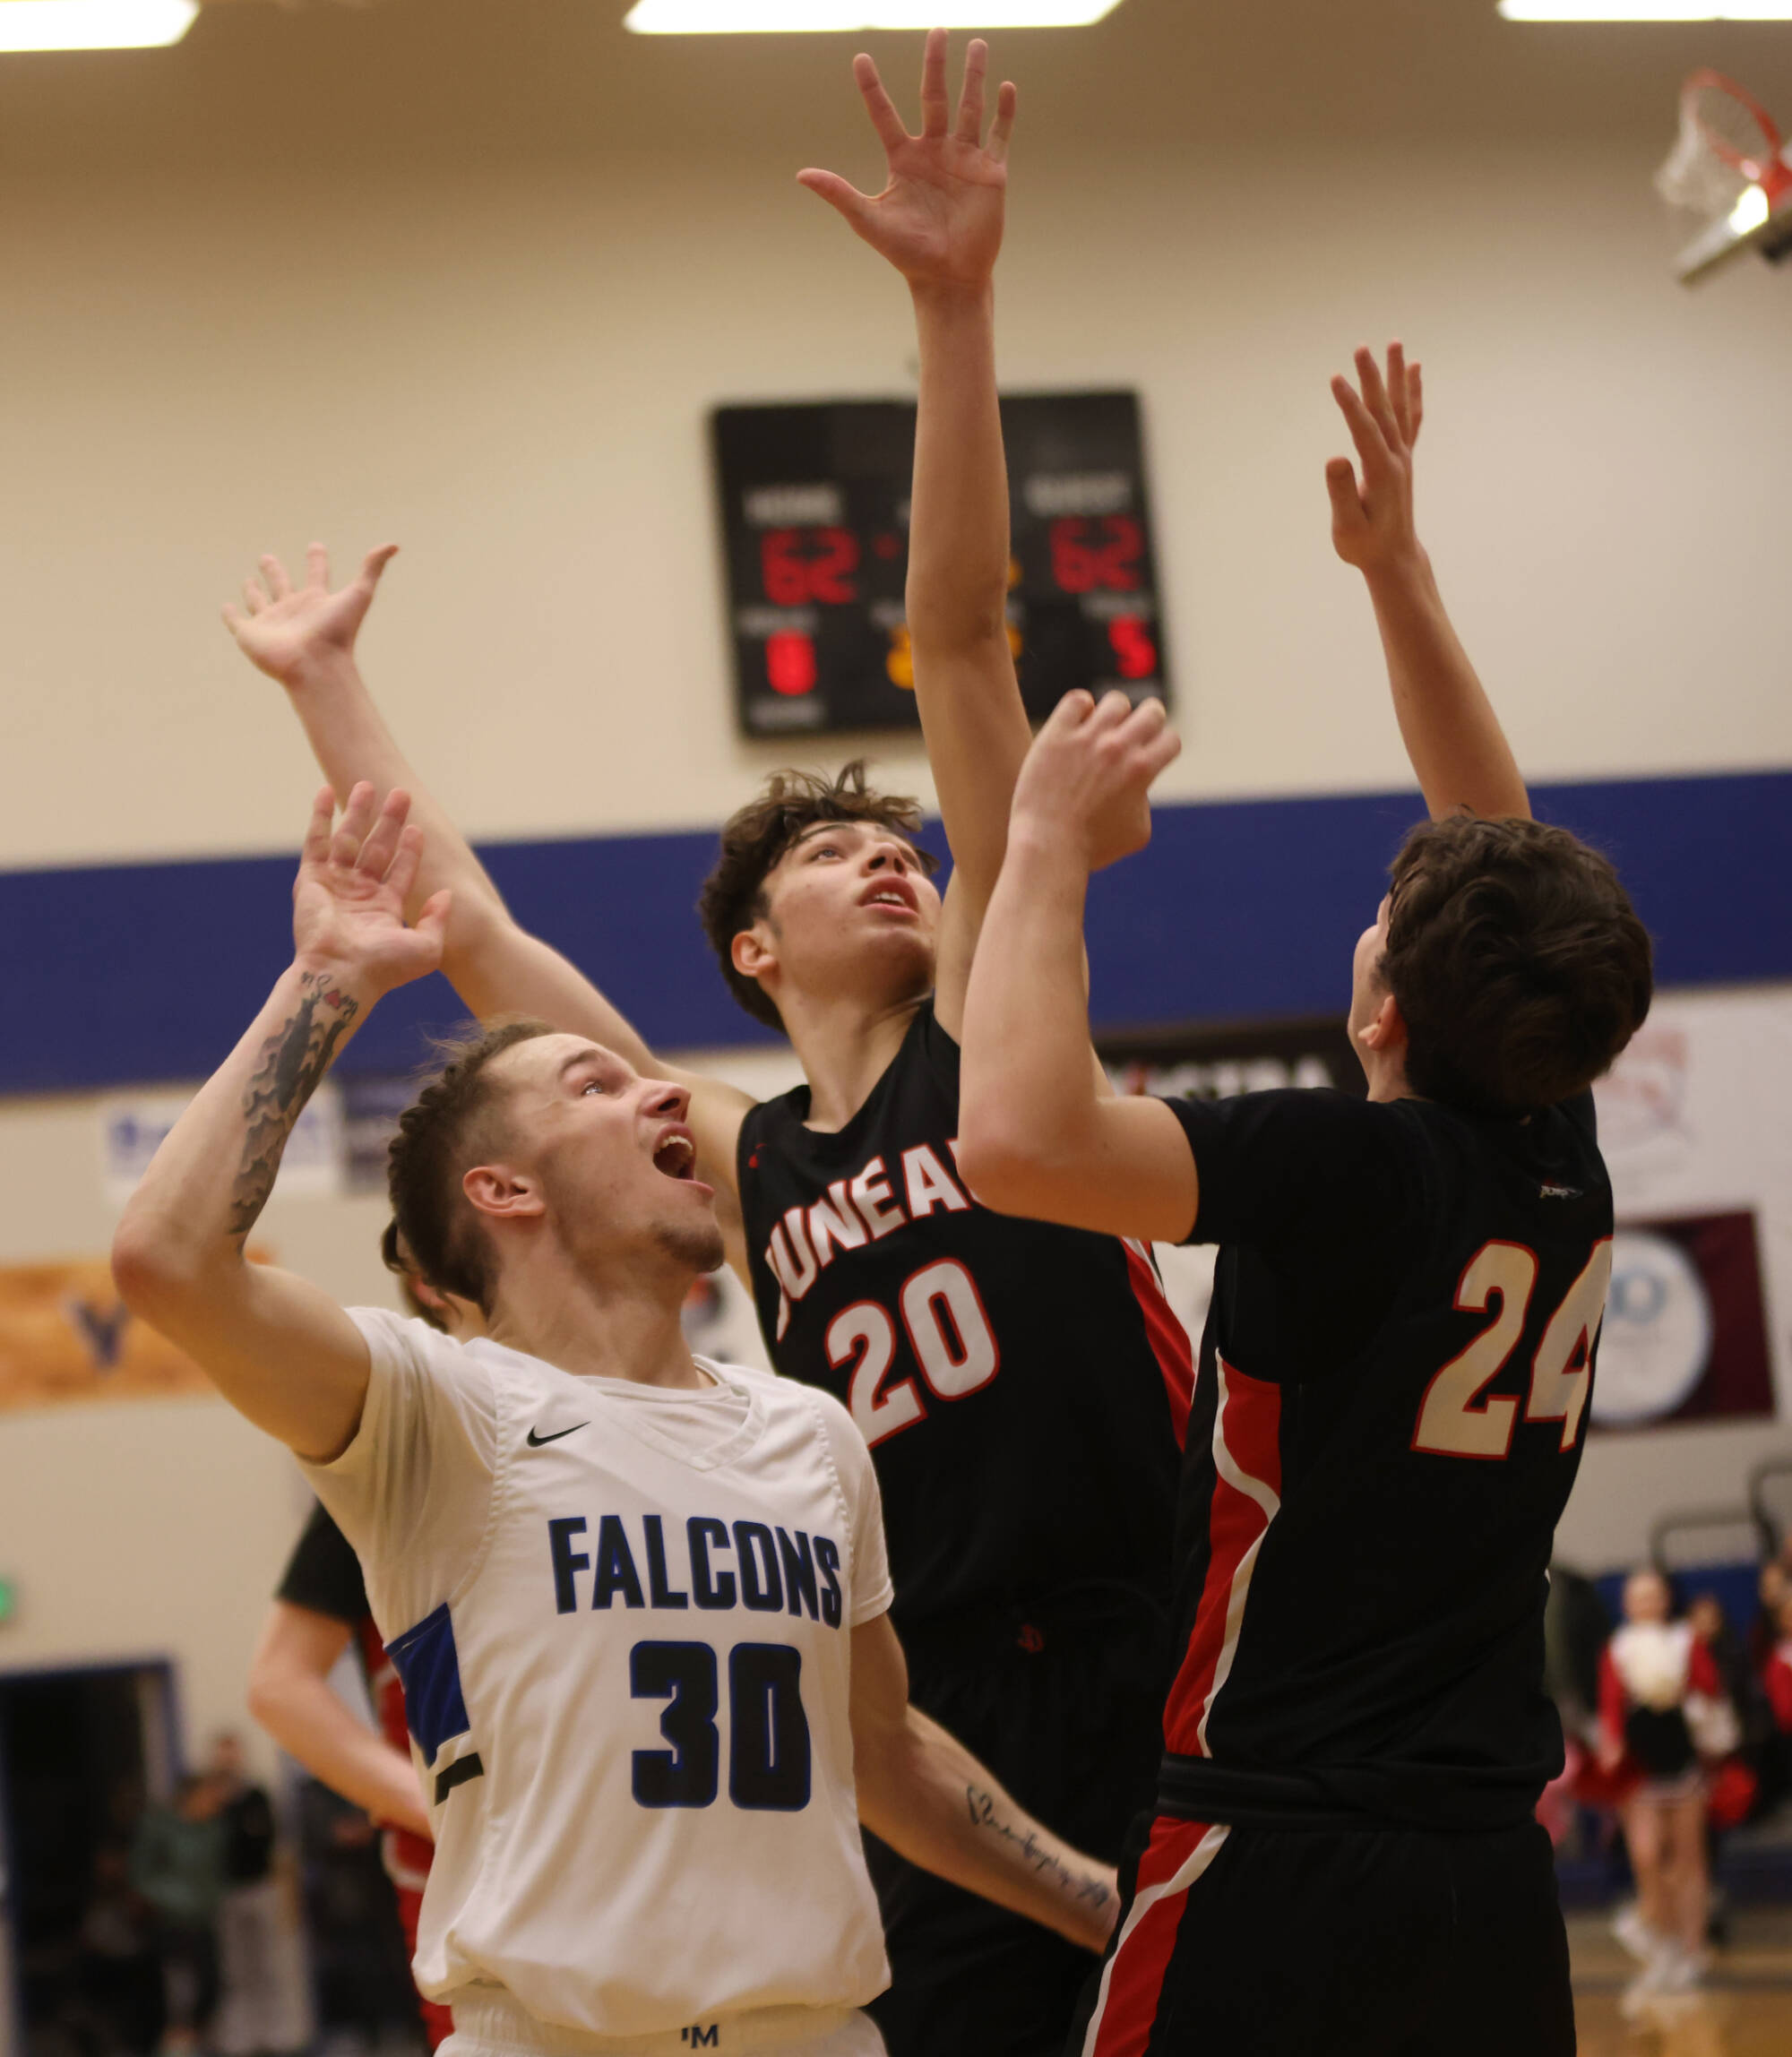 TMHS junior Thomas Baxter (30) watches as his game-winning shot makes its way past the arms of JDHS senior Orion Dybdahl (20) and JDHS senior Kai Hargrave (24) who contested the shot closely. (Ben Hohenstatt / Juneau Empire)